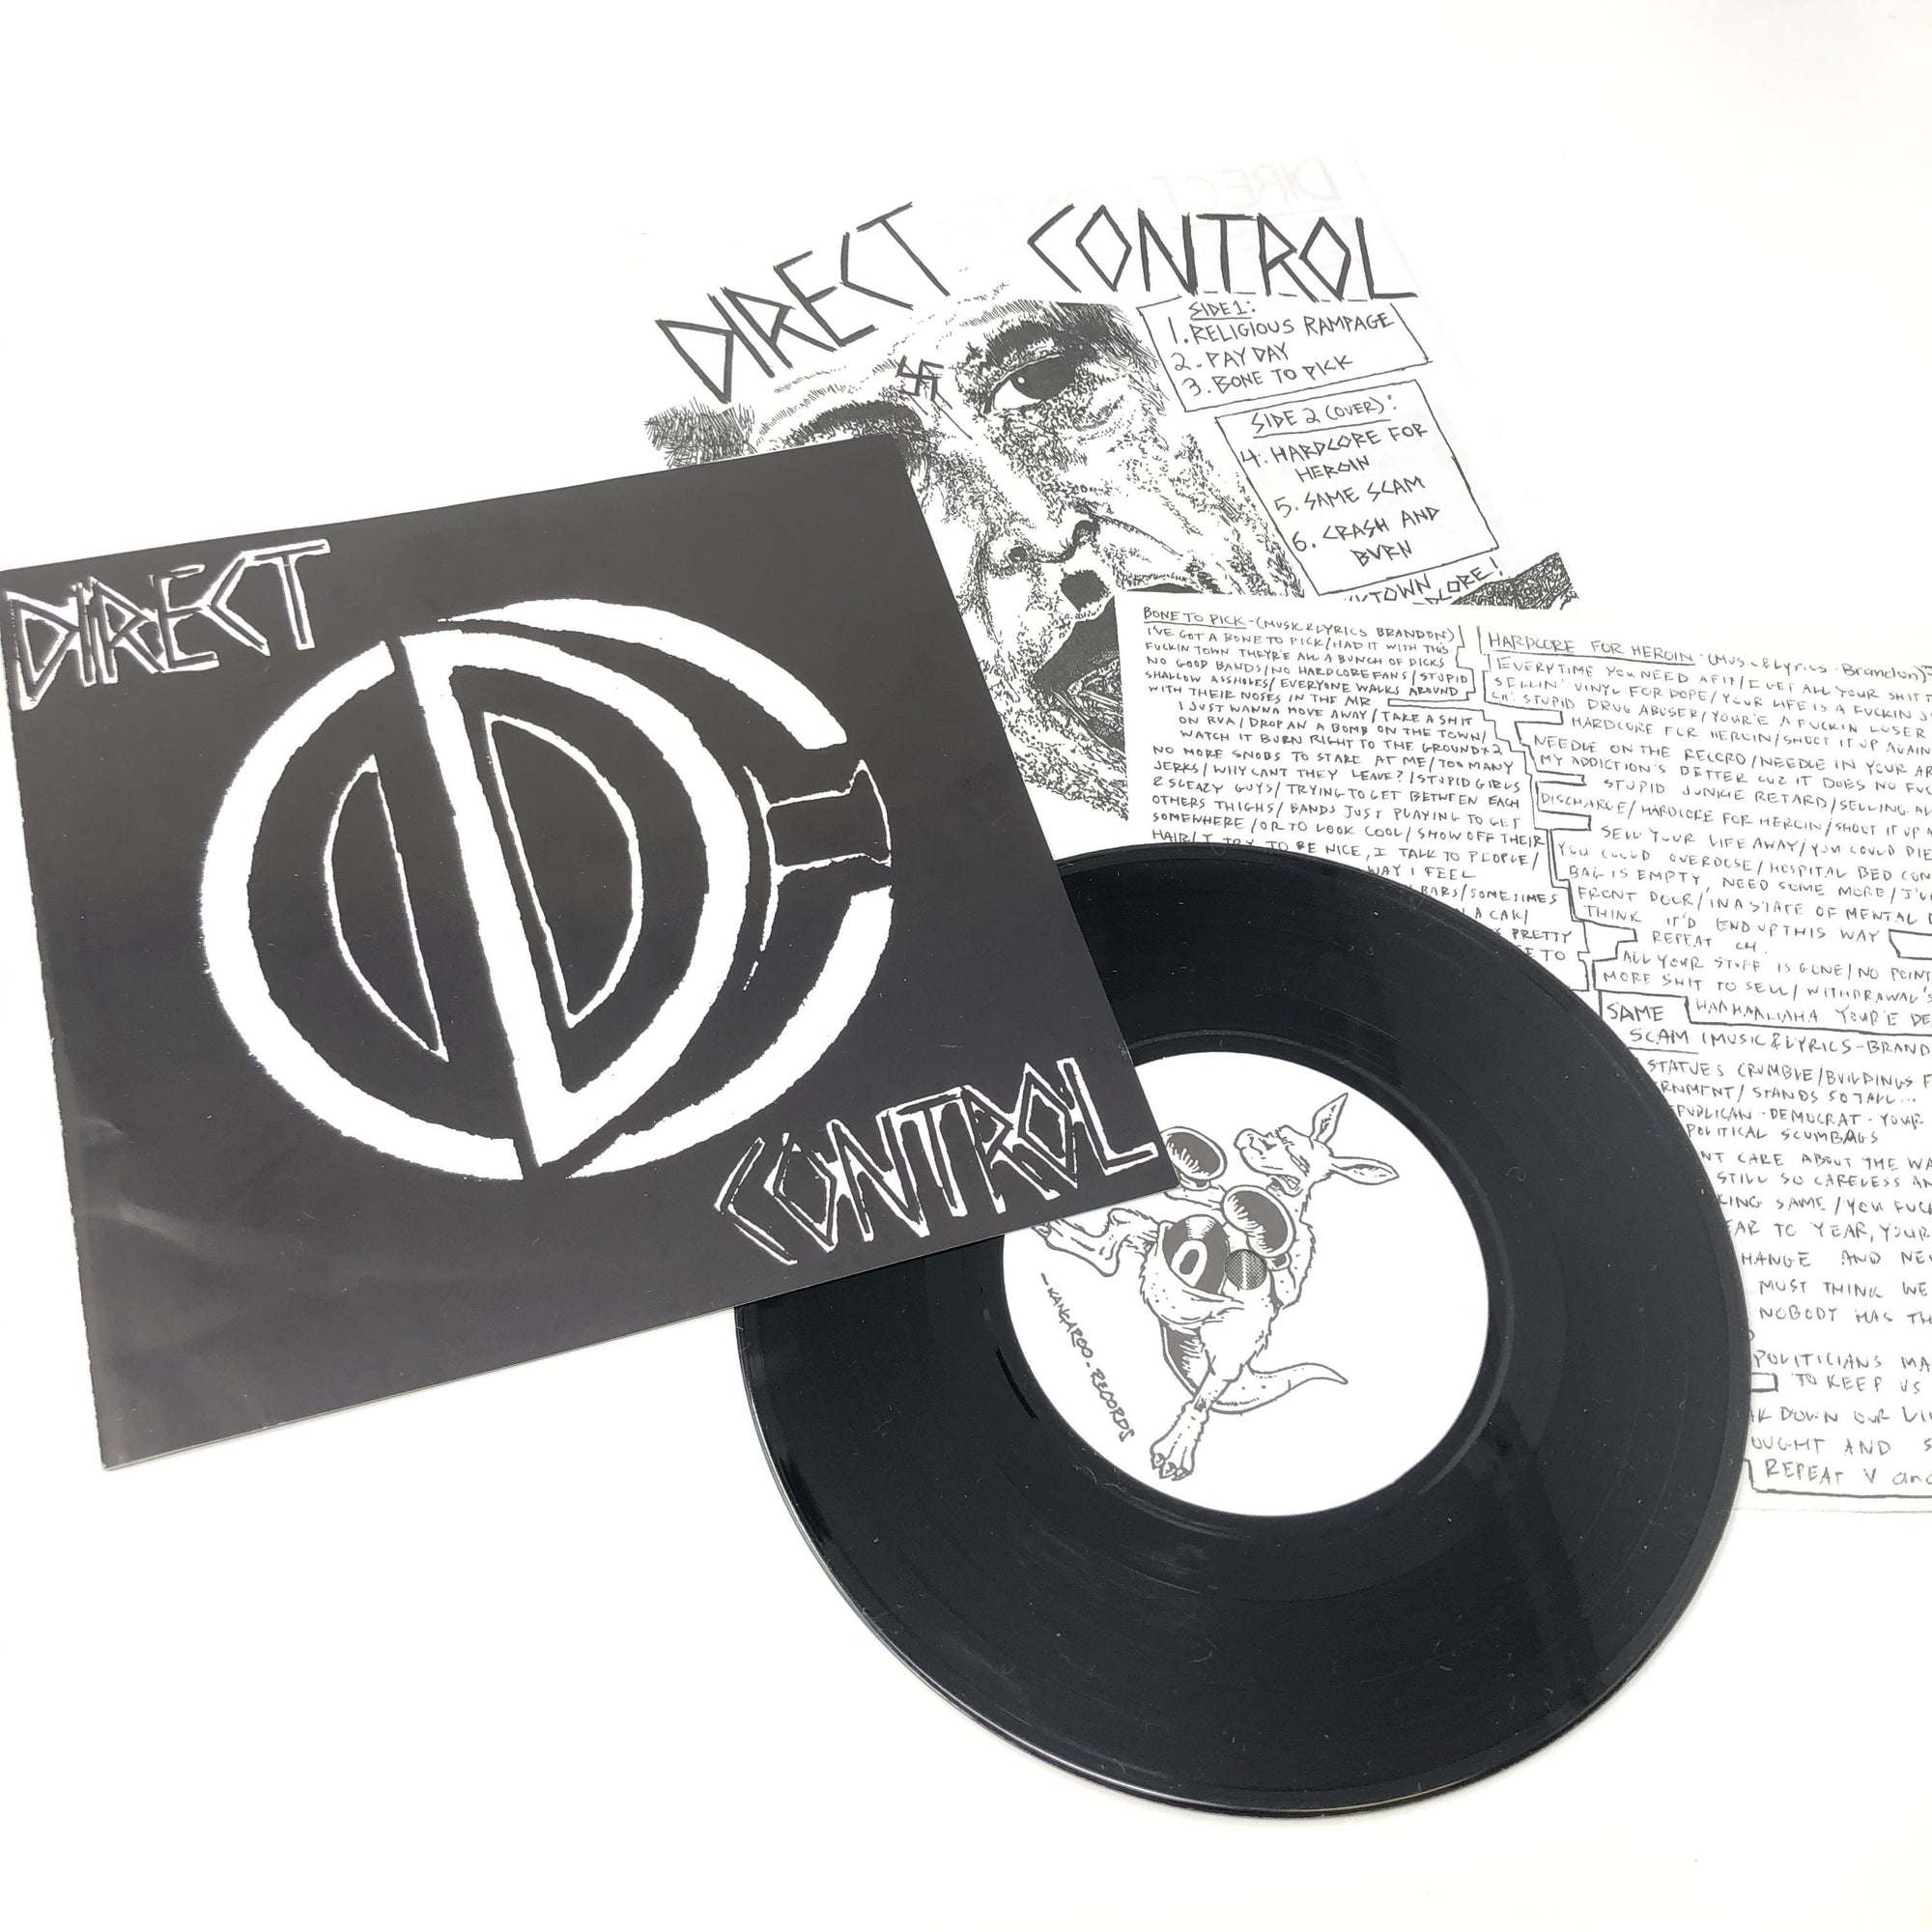 Direct Control - S/T 7"